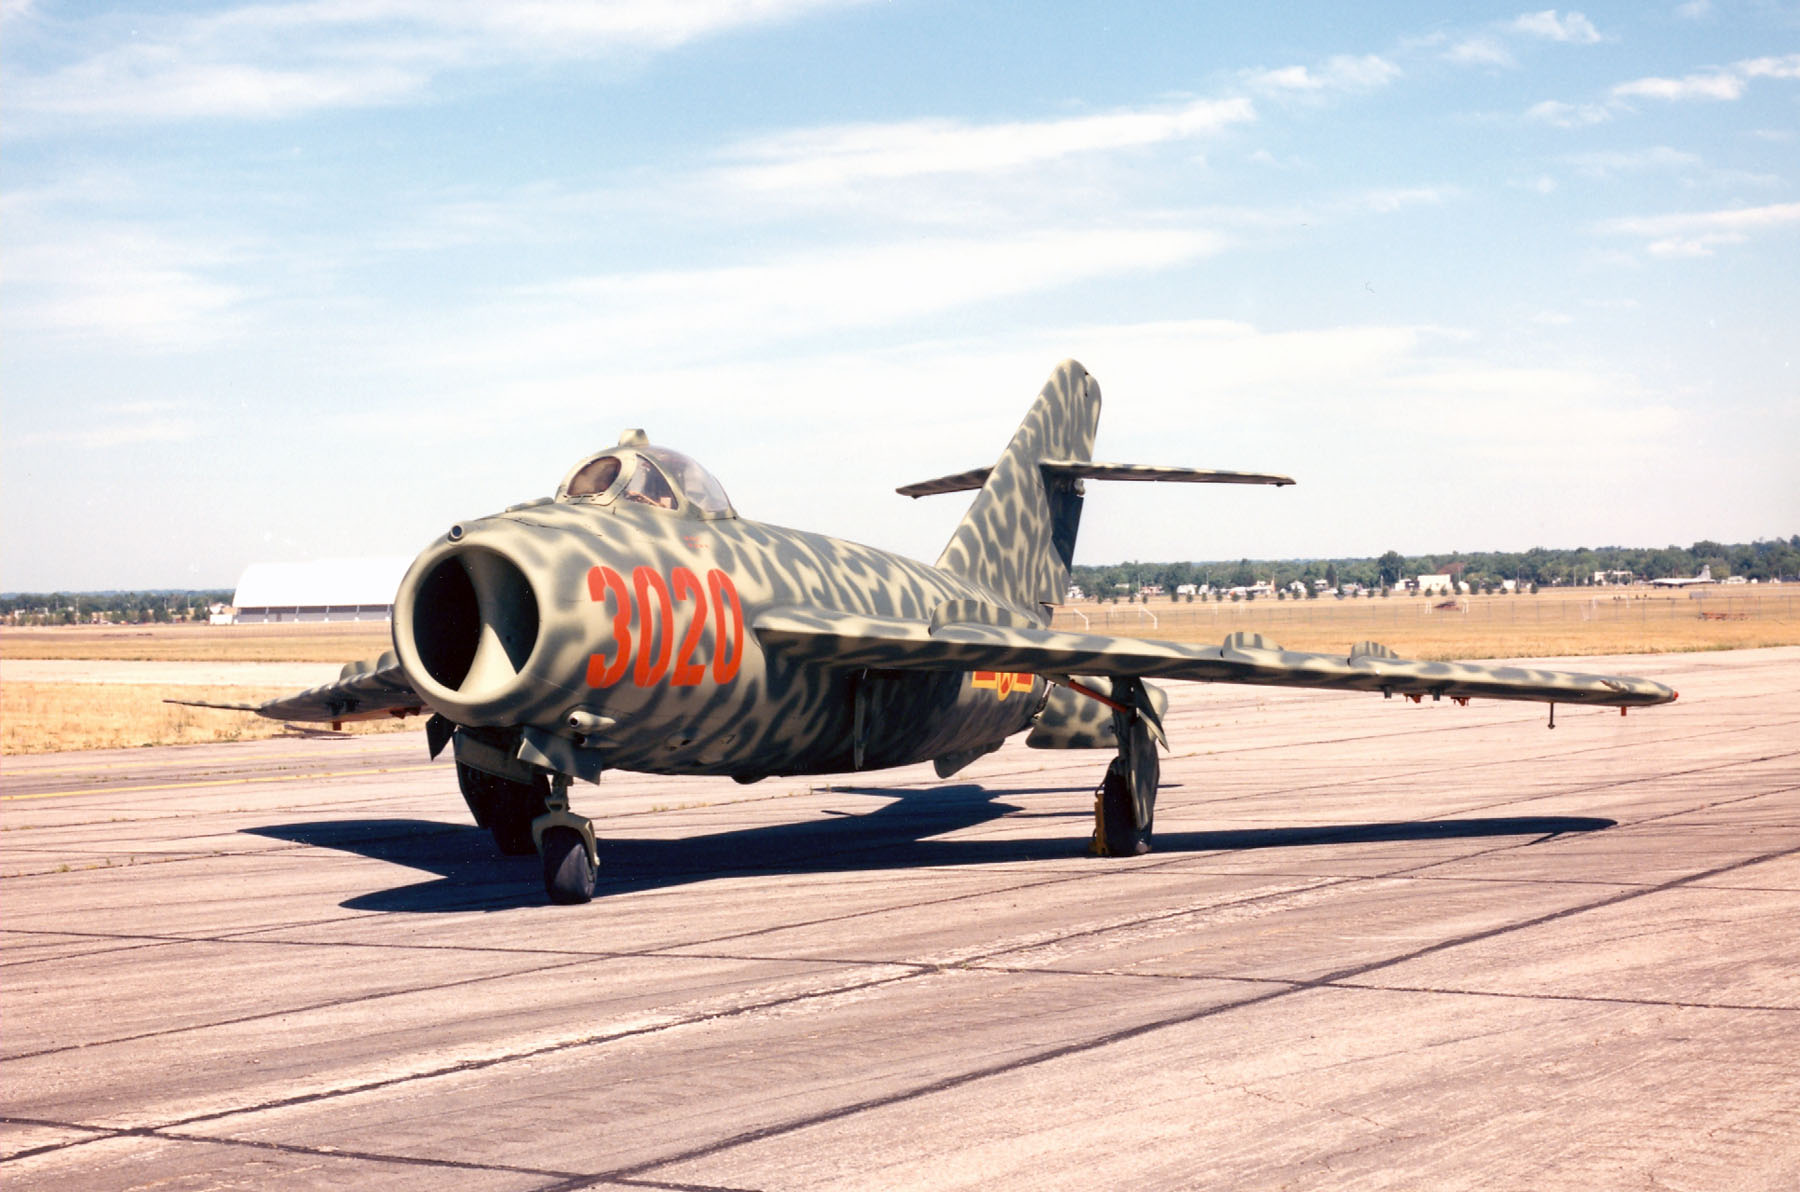 This former Egyptian Air Force Mikoyan-Gurevivch MiG-17F in the collection of the National Museum of the United States Air Force is painted in the colors of the Vietnam Peoples' Air Force. (U.S. Air Force)